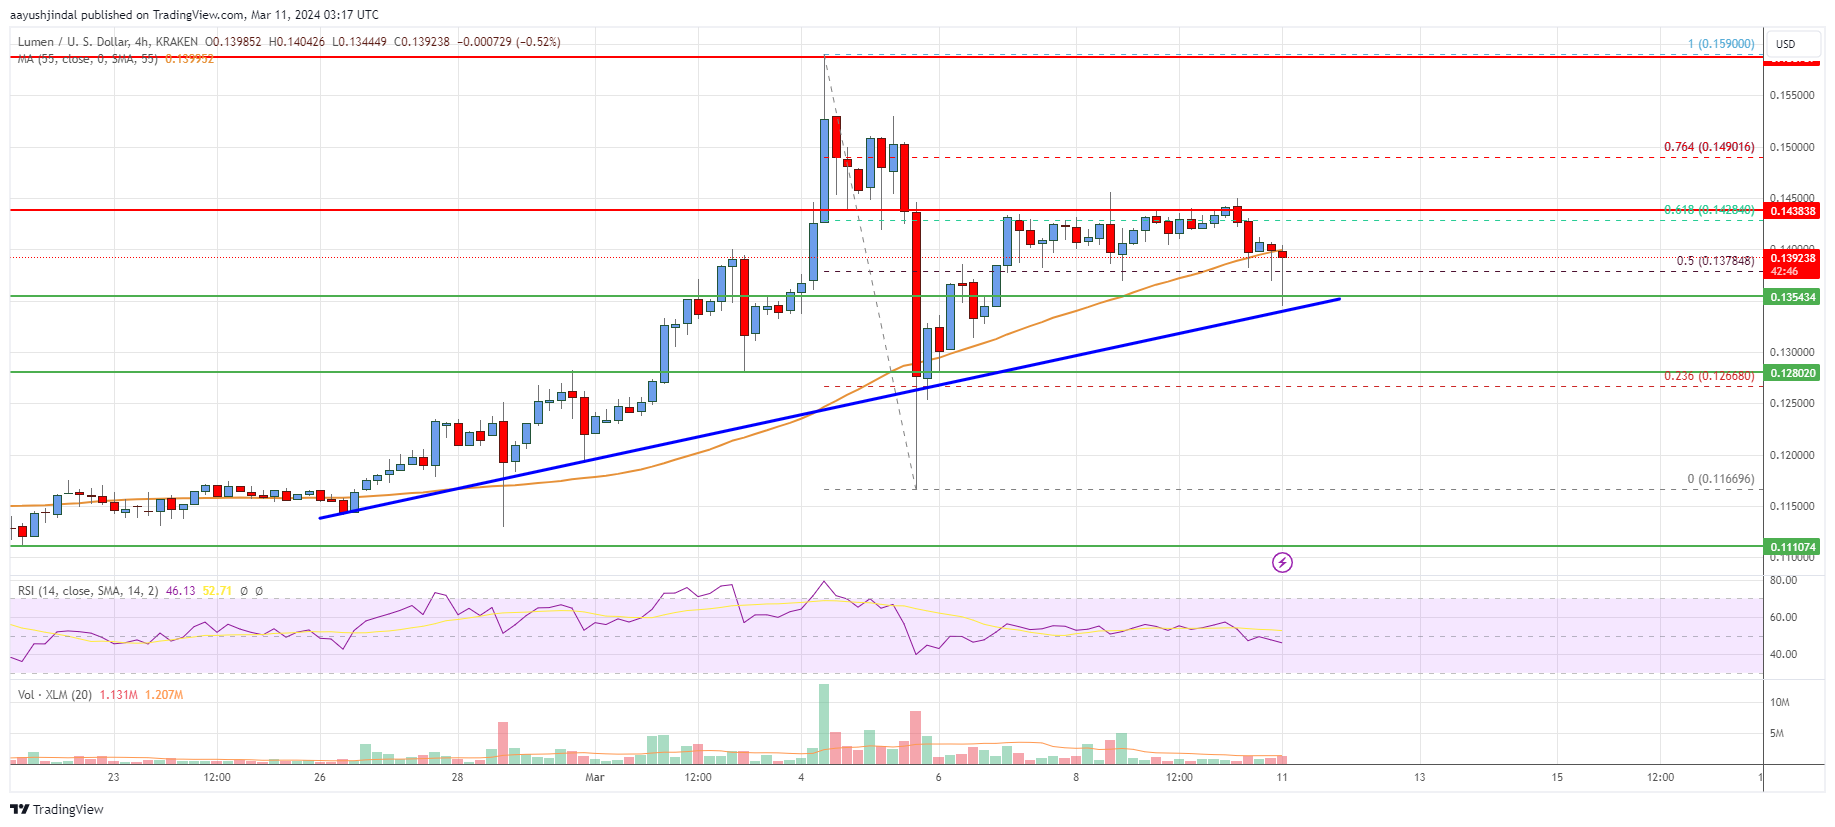 Stellar Lumen (XLM) Price Could Gain Pace If It Clears $0.15